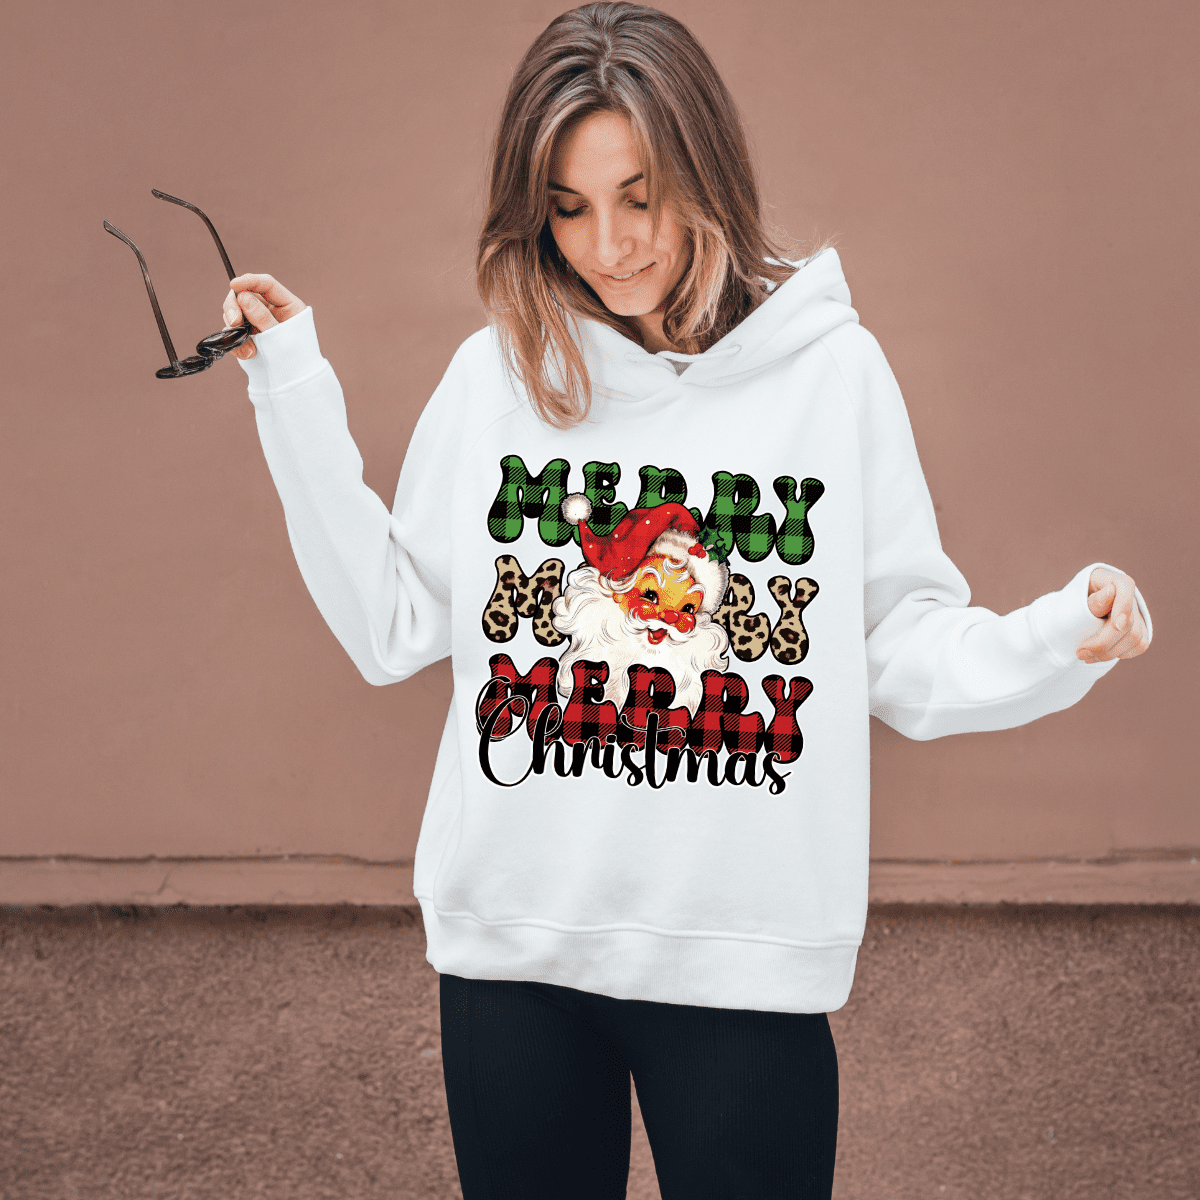 Image shows a t shirt transfer that says merry merry merry Christmas with Santa